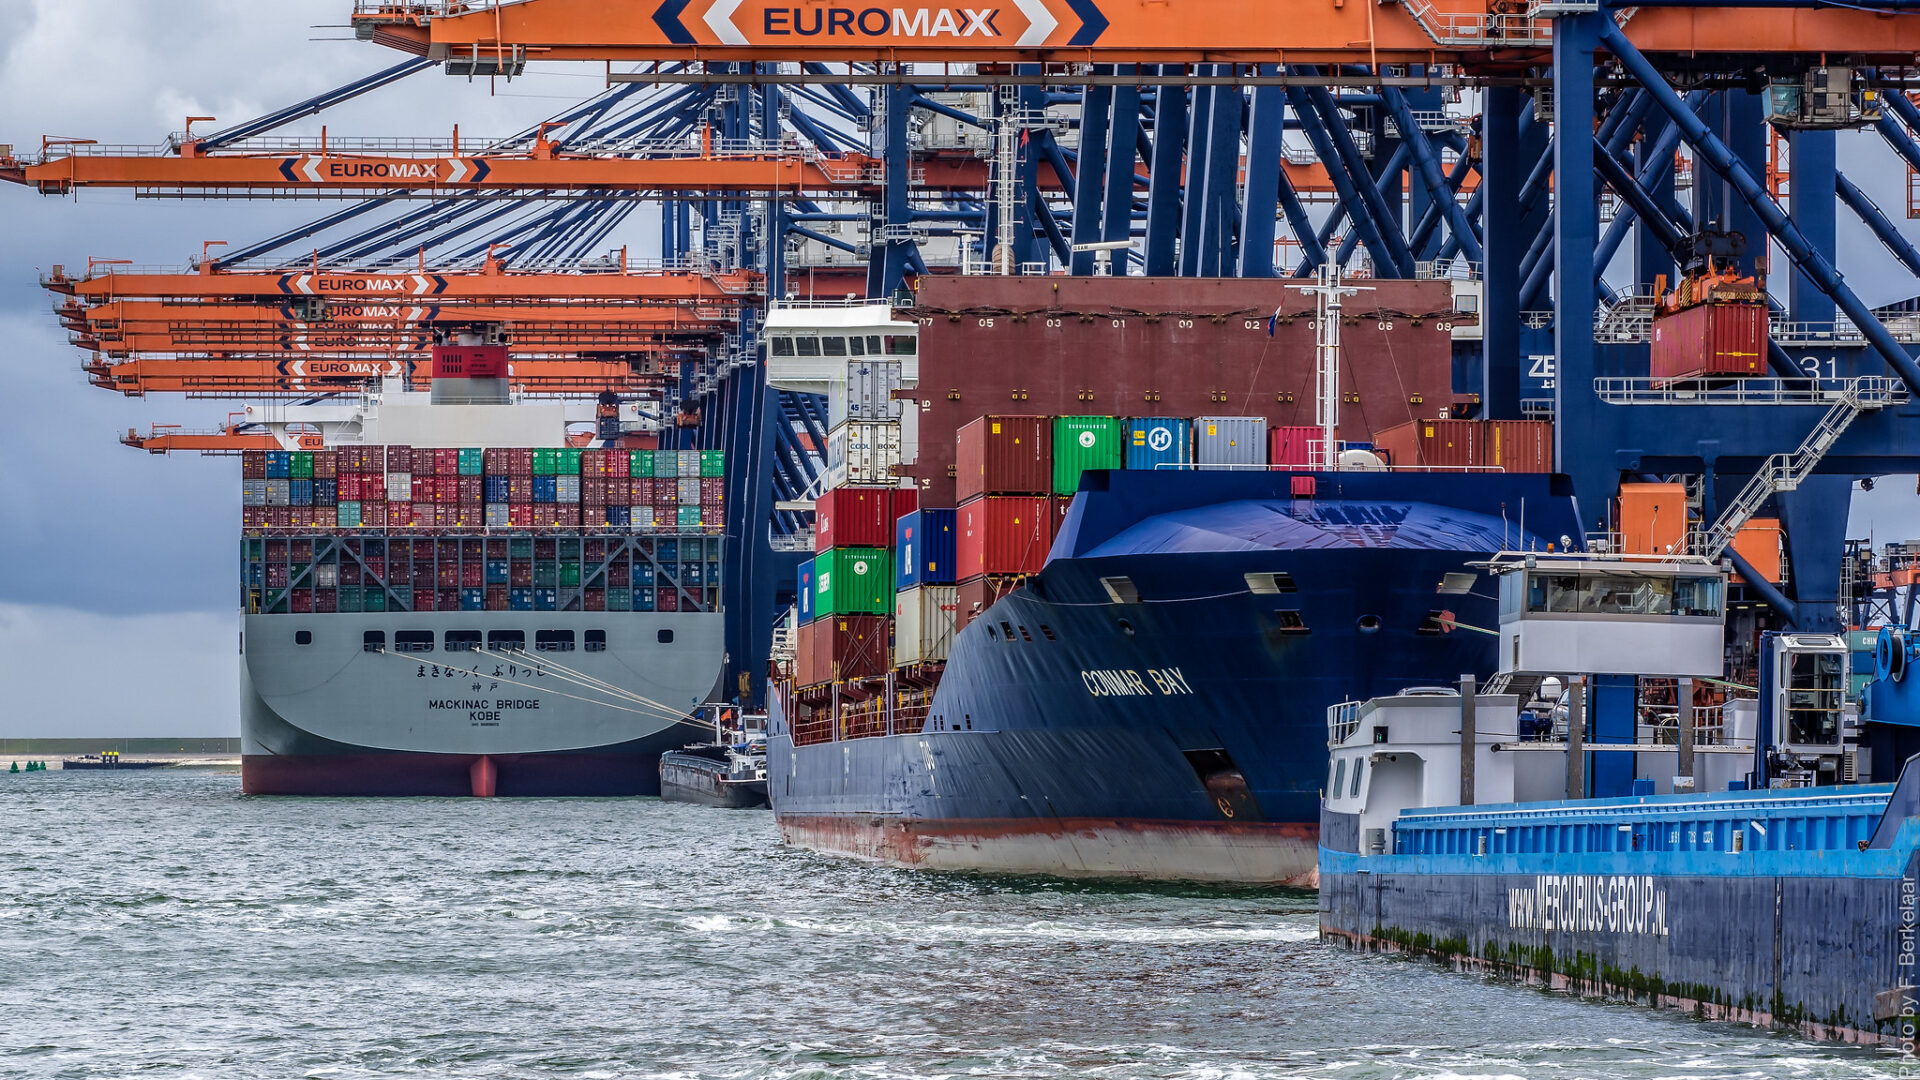 Container ships dock at the Euromax Terminal in the Port of Rotterdam. Photo: Frans Berkelaar